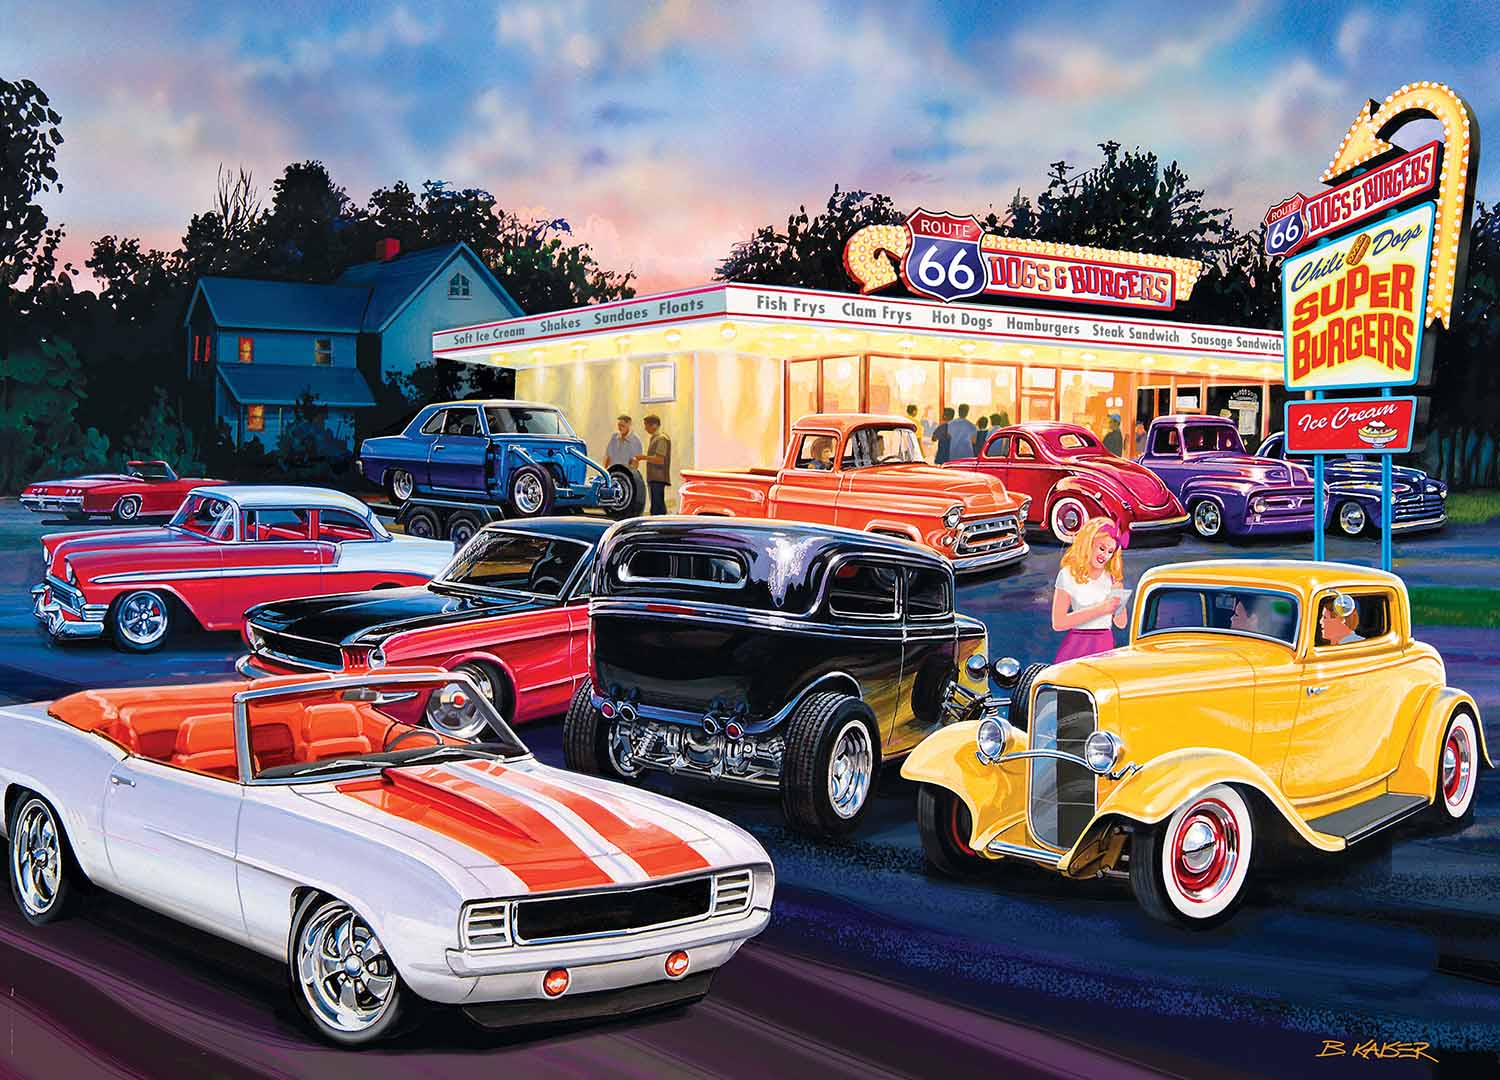 Dogs & Burgers Vehicles Jigsaw Puzzle